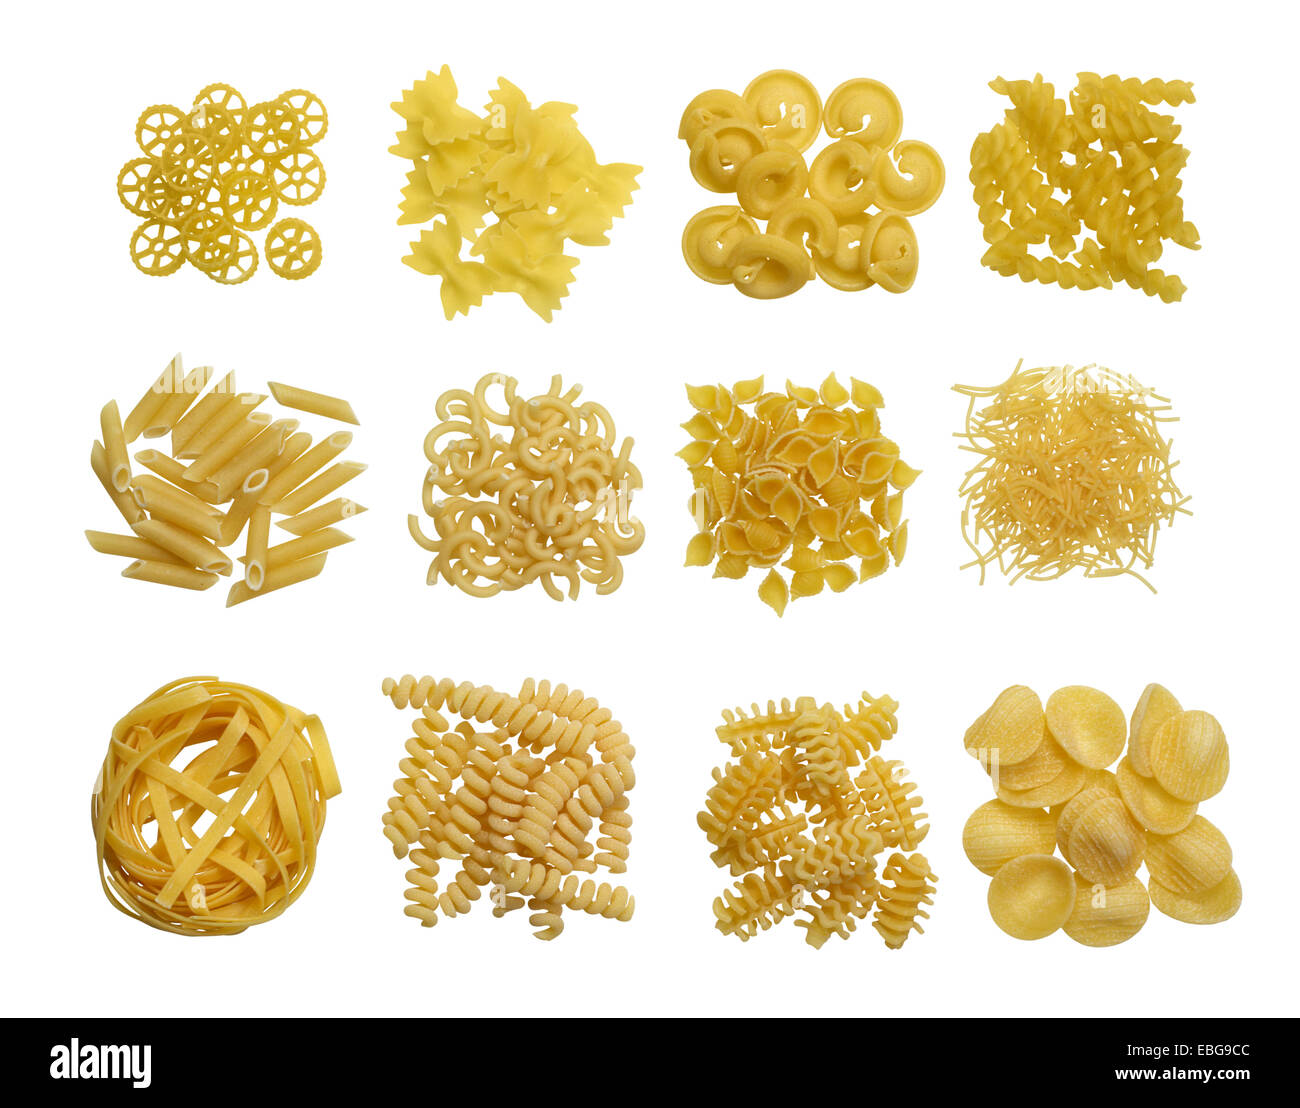 Small Pictures Of Pasta 13